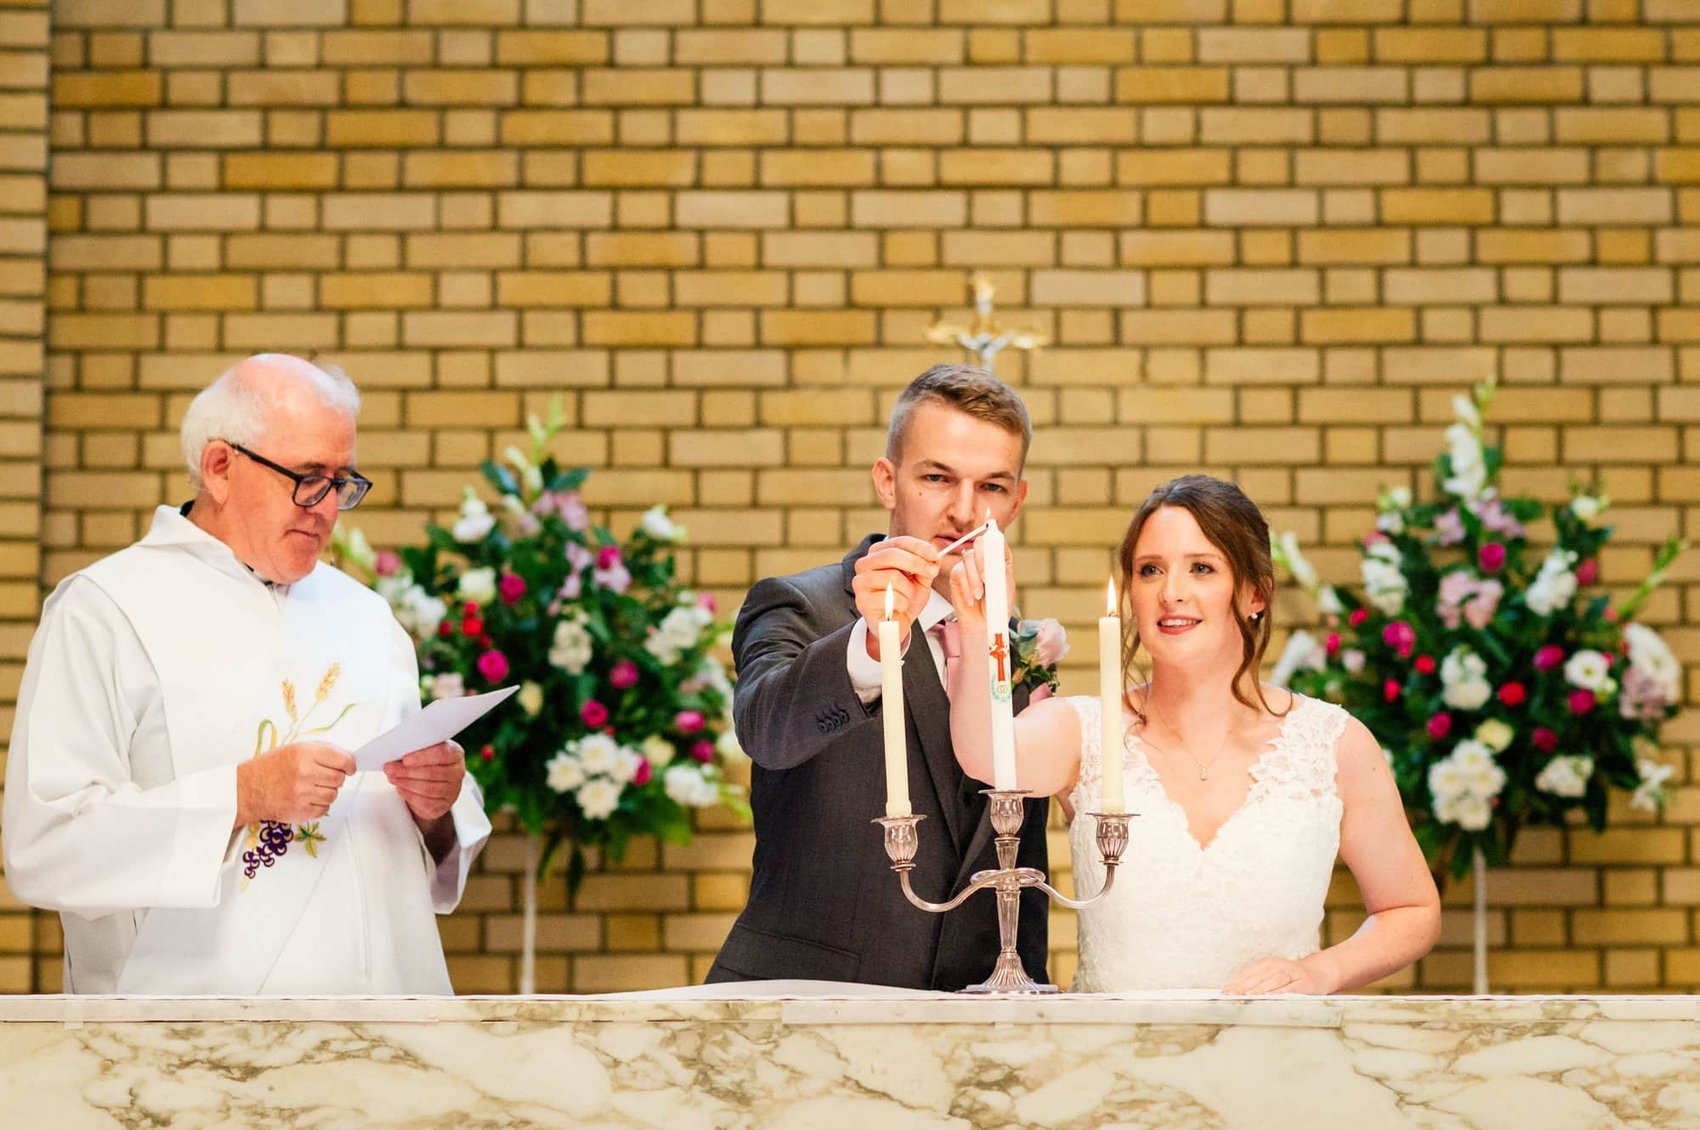 Lighting the centre candle in St Mary's Catholic Church wedding ceremony